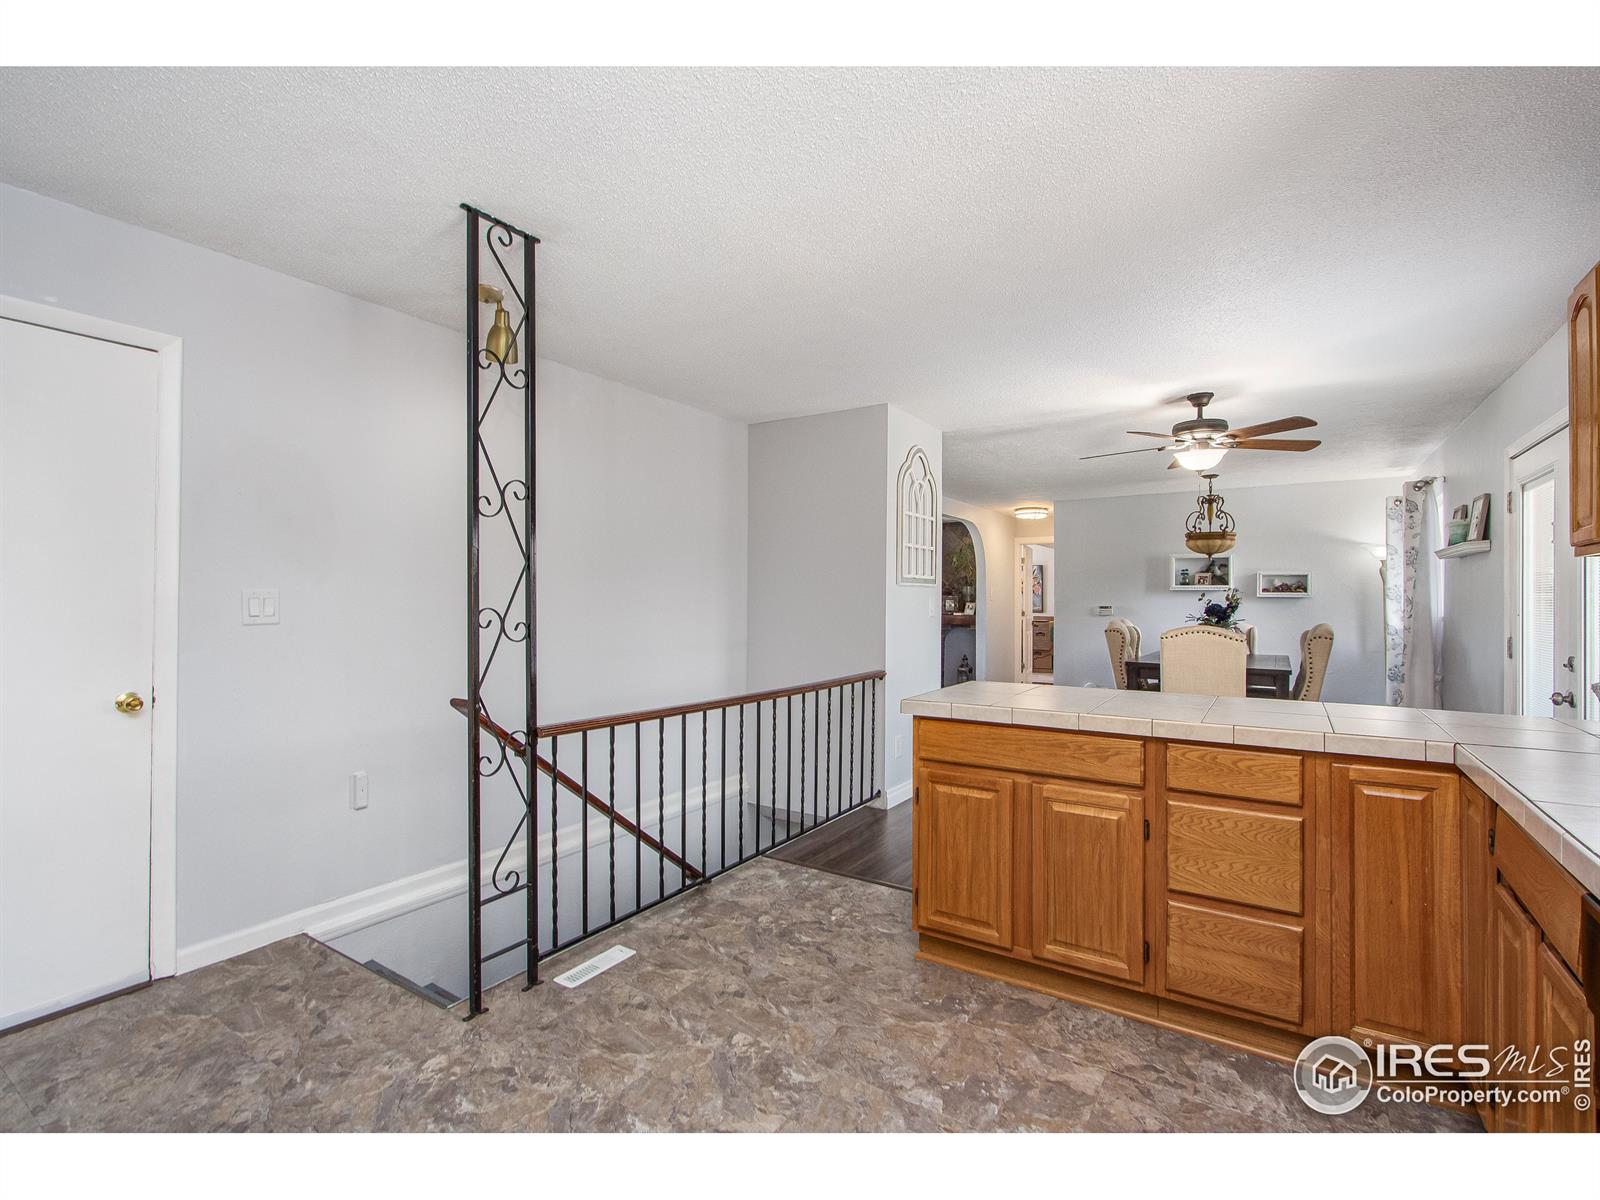 3105 13th, Greeley, CO